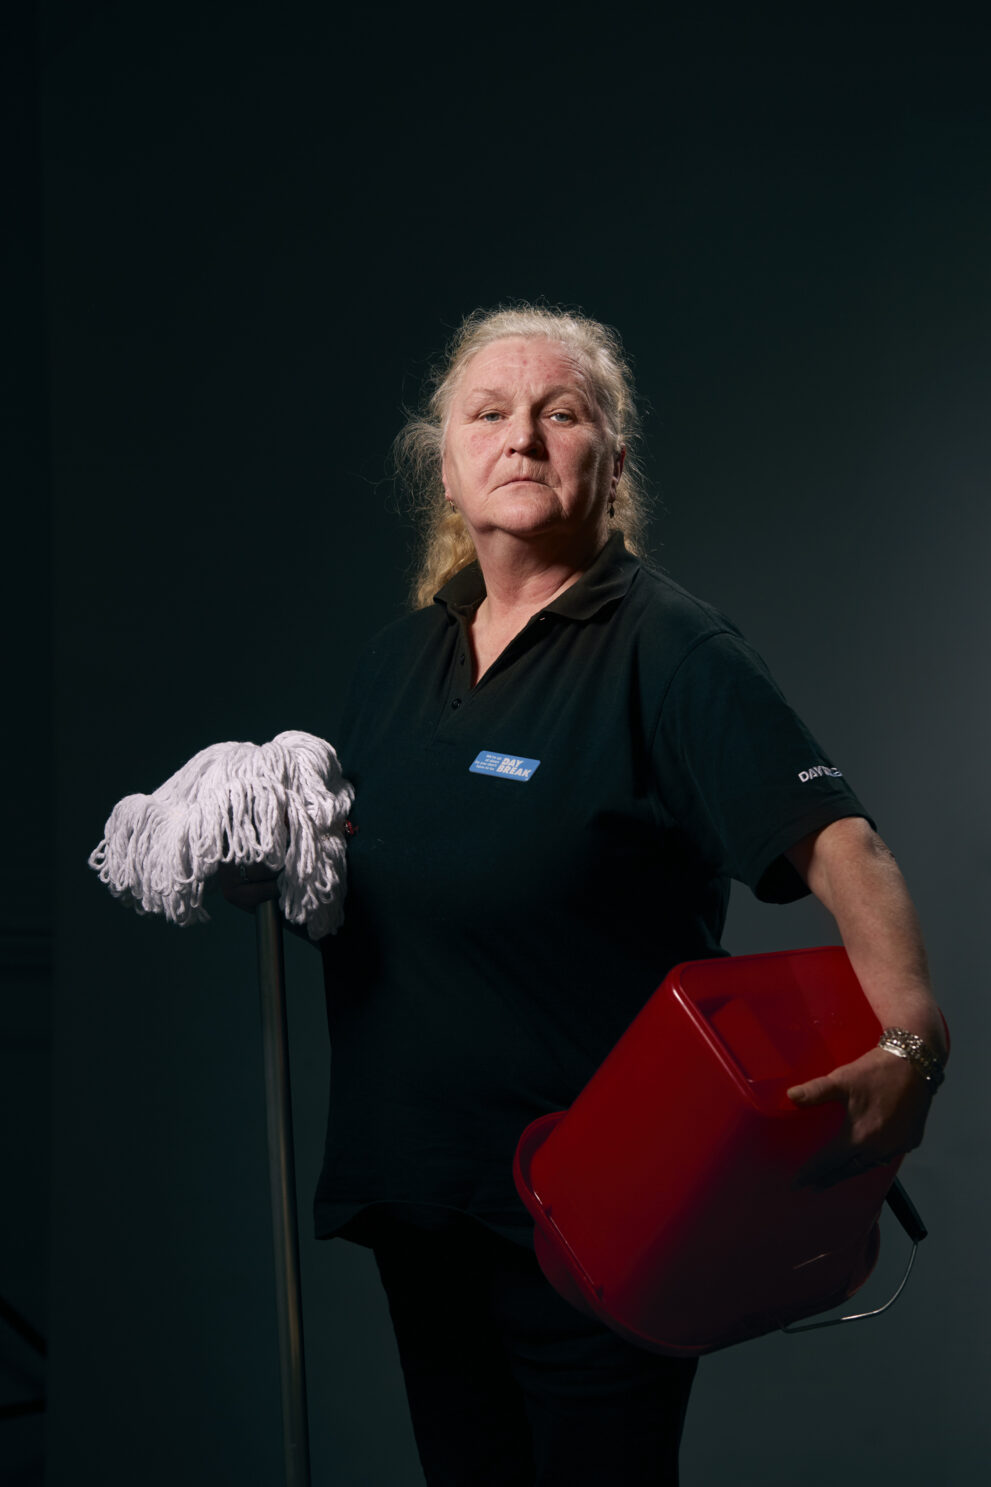 Portrait Of Ola From Daybreak Cleaning Company by Peter Dibdin commercial photographer based in Edinburgh Scotland